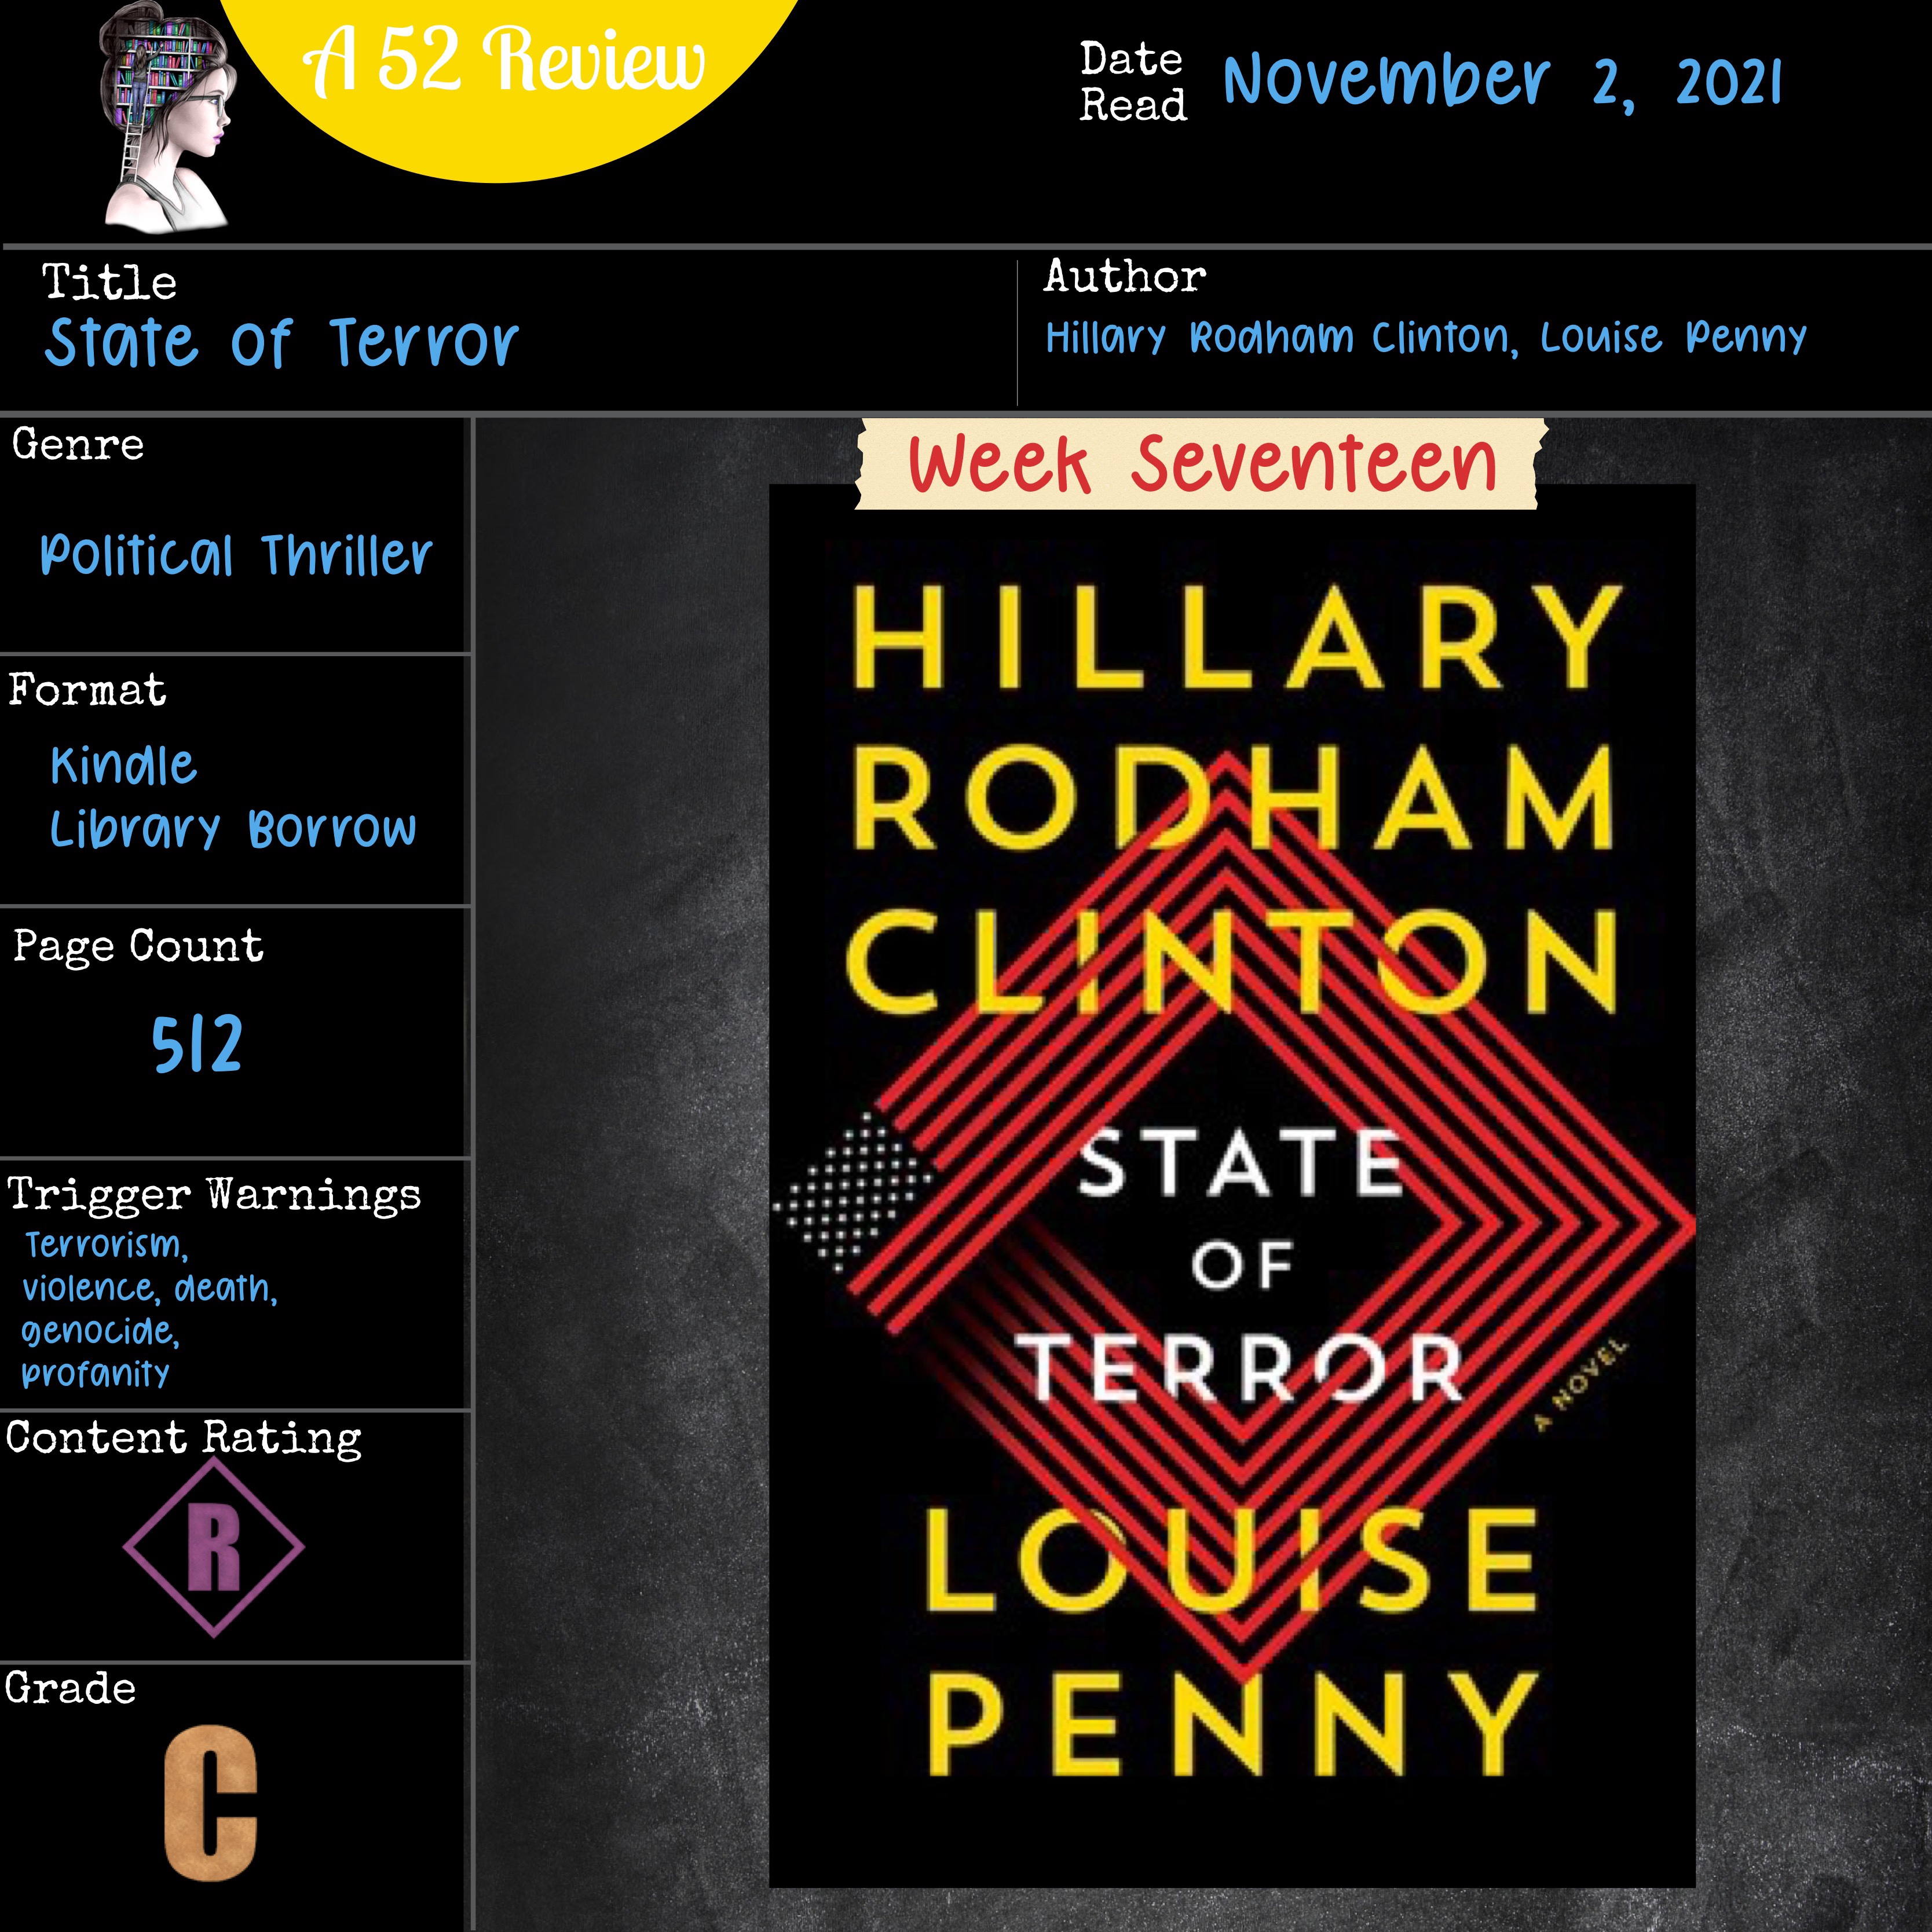 Review: Hillary Clinton and Louis Penny's 'State of Terror' - Los